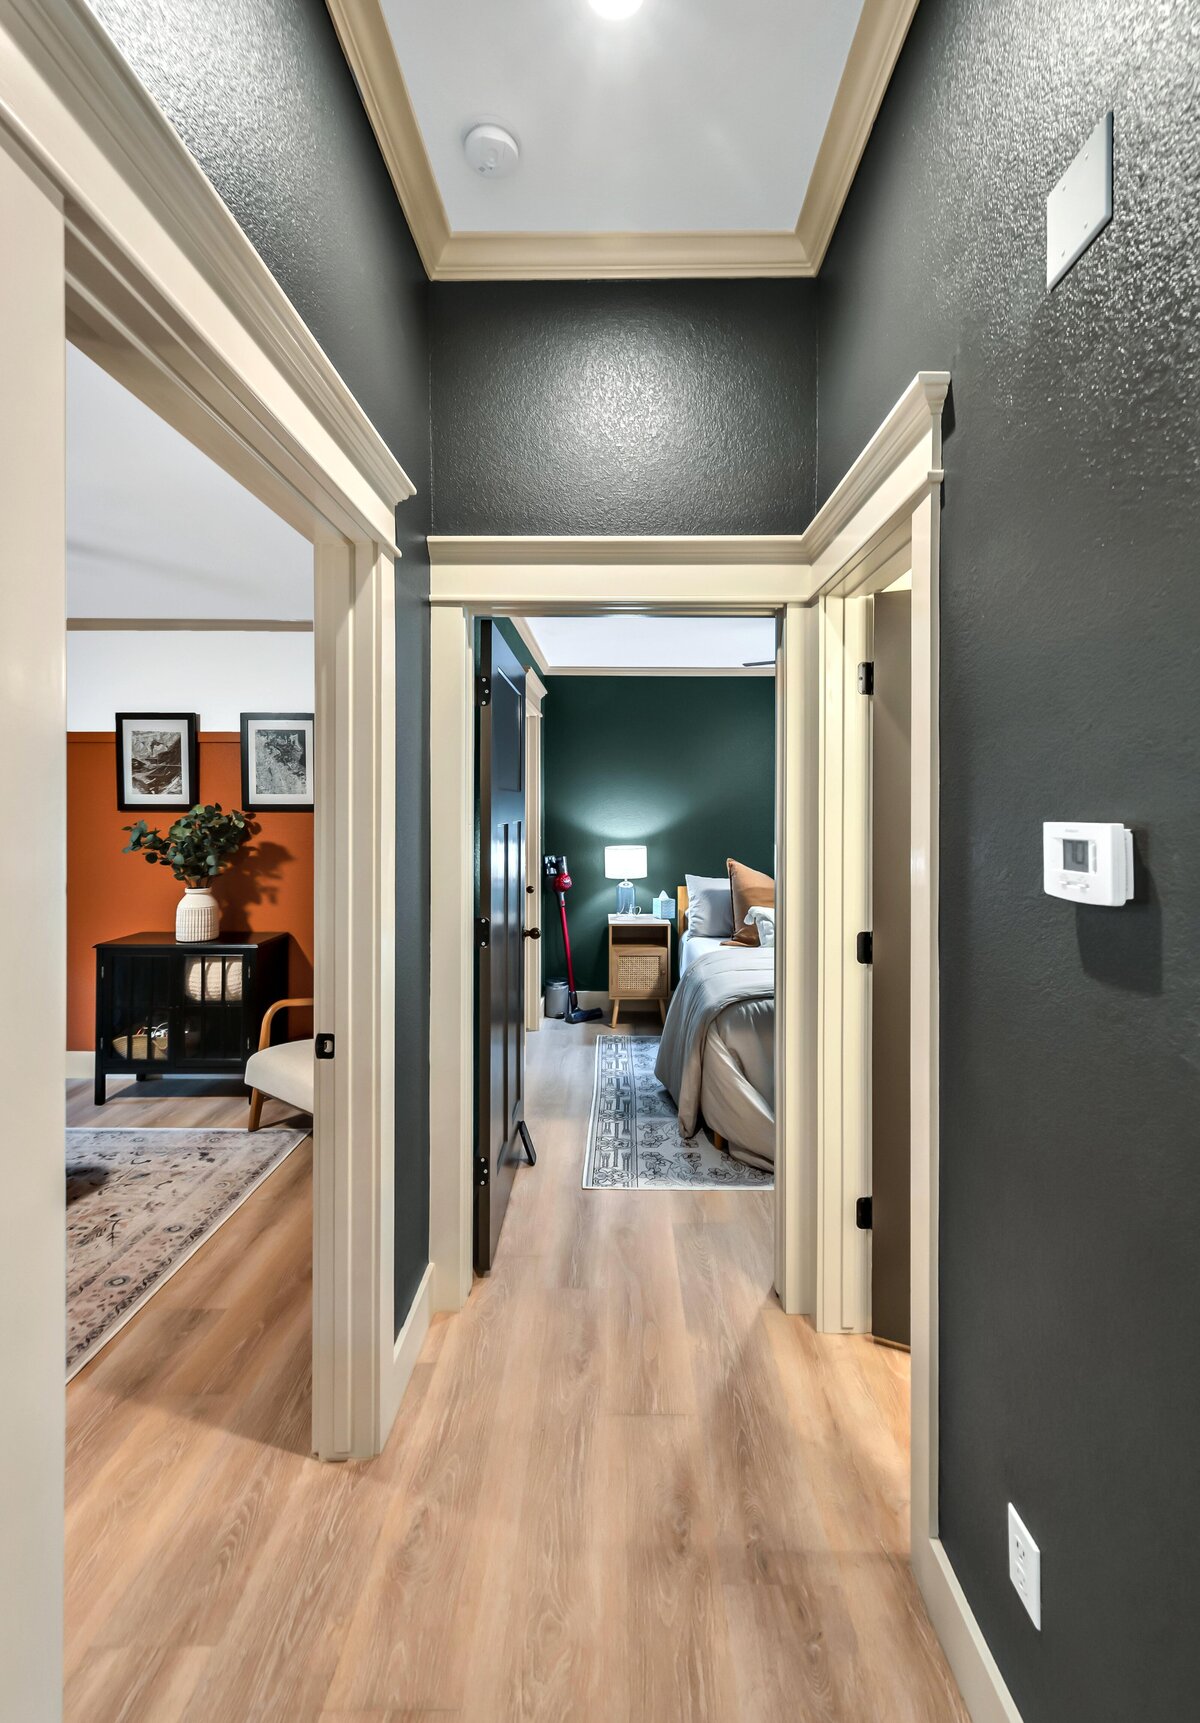 Hallway opening up to bedrooms in this three-bedroom, three-bathroom vacation rental home with free wifi, outdoor theater, hot tub, propane grill and private yard in Waco, TX.